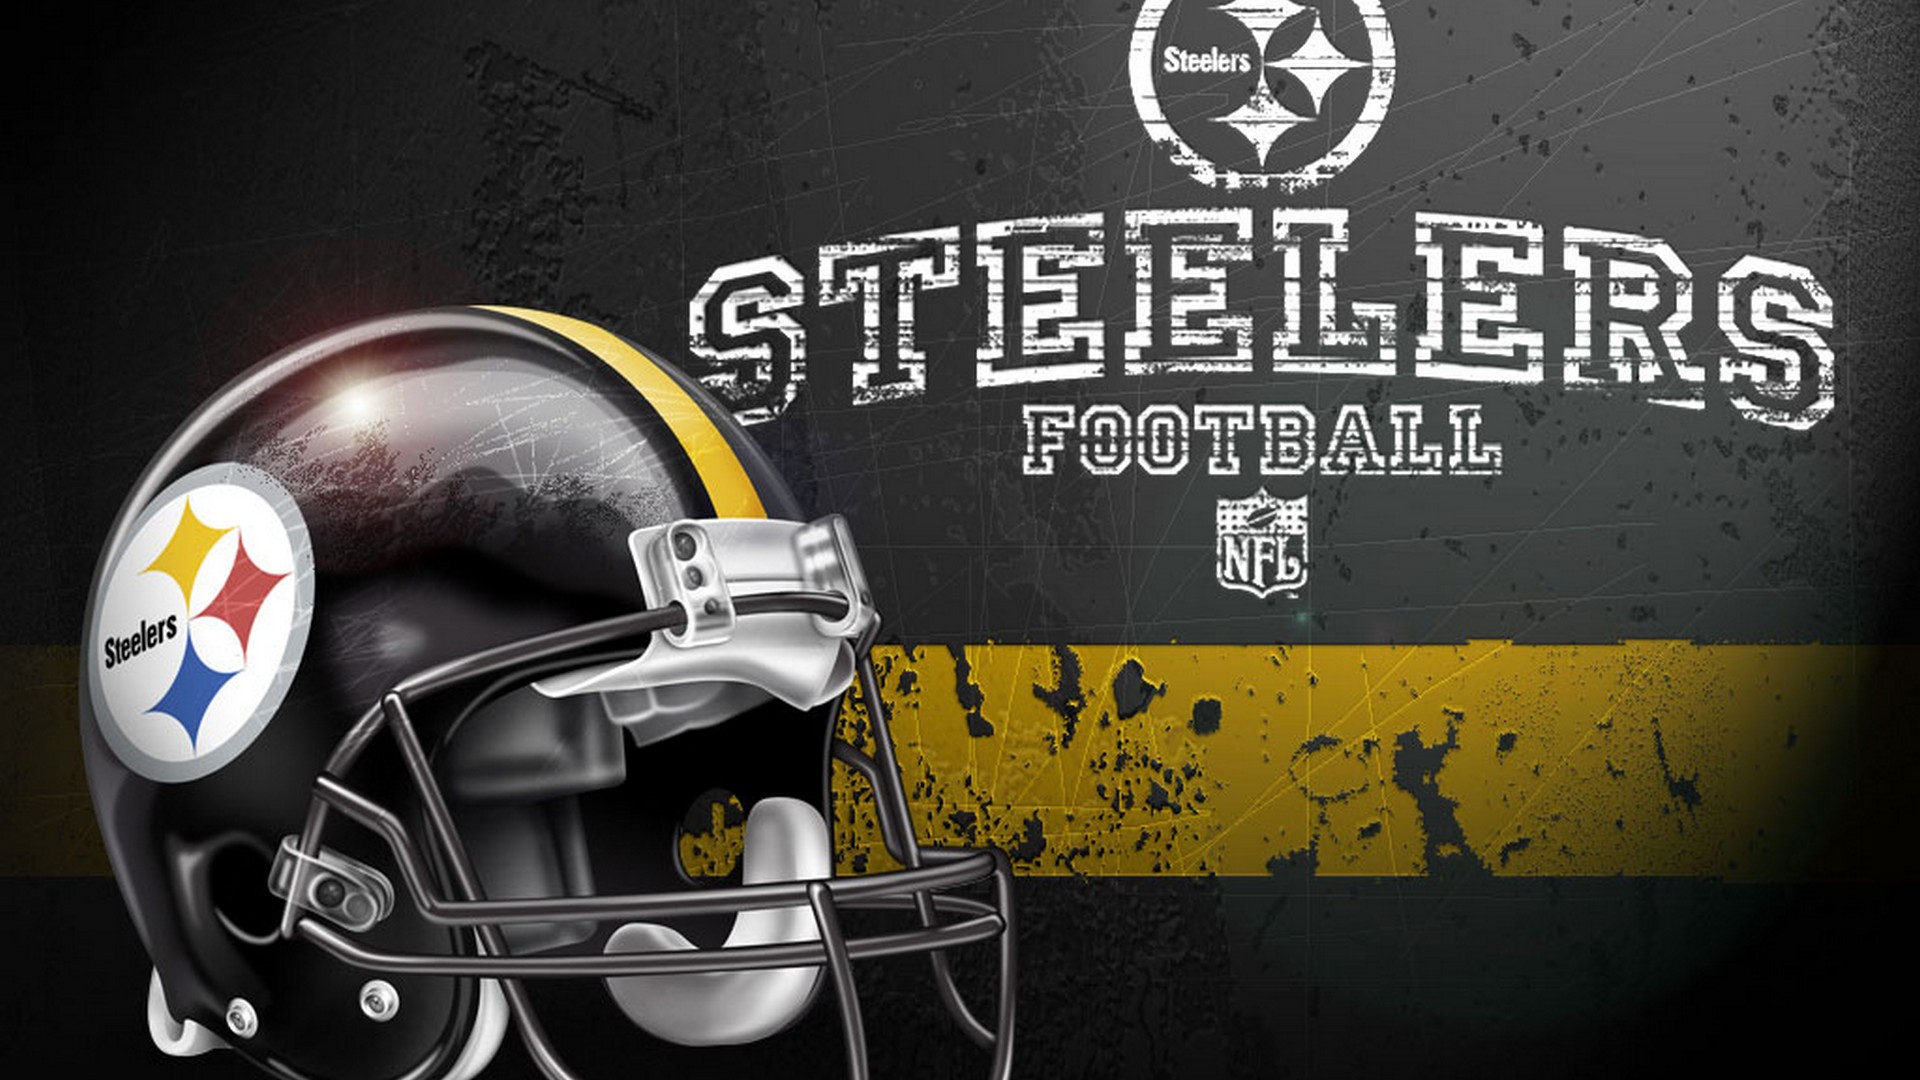 Wallpapers HD Steelers with resolution 1920x1080 pixel. You can make this wallpaper for your Mac or Windows Desktop Background, iPhone, Android or Tablet and another Smartphone device